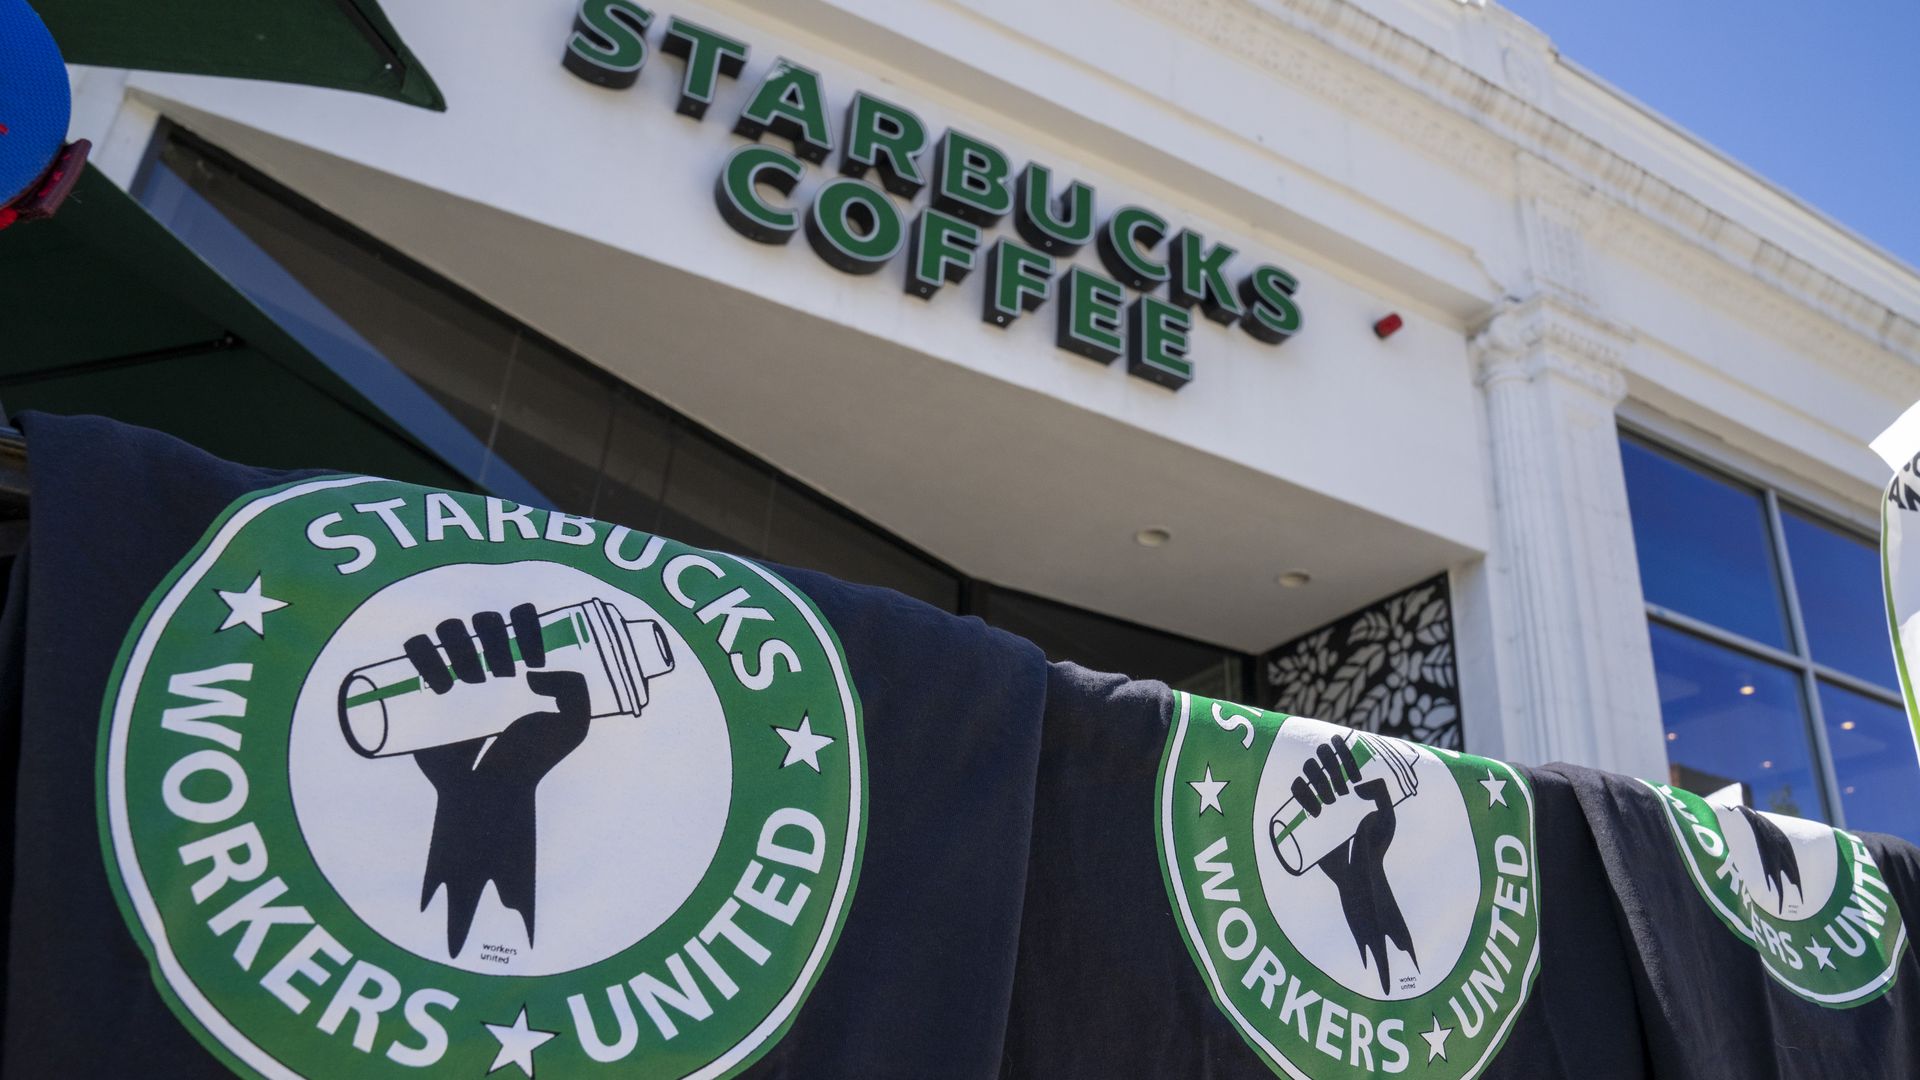 Starbucks Workers United t-shirts hang outside while unionized workers strike.